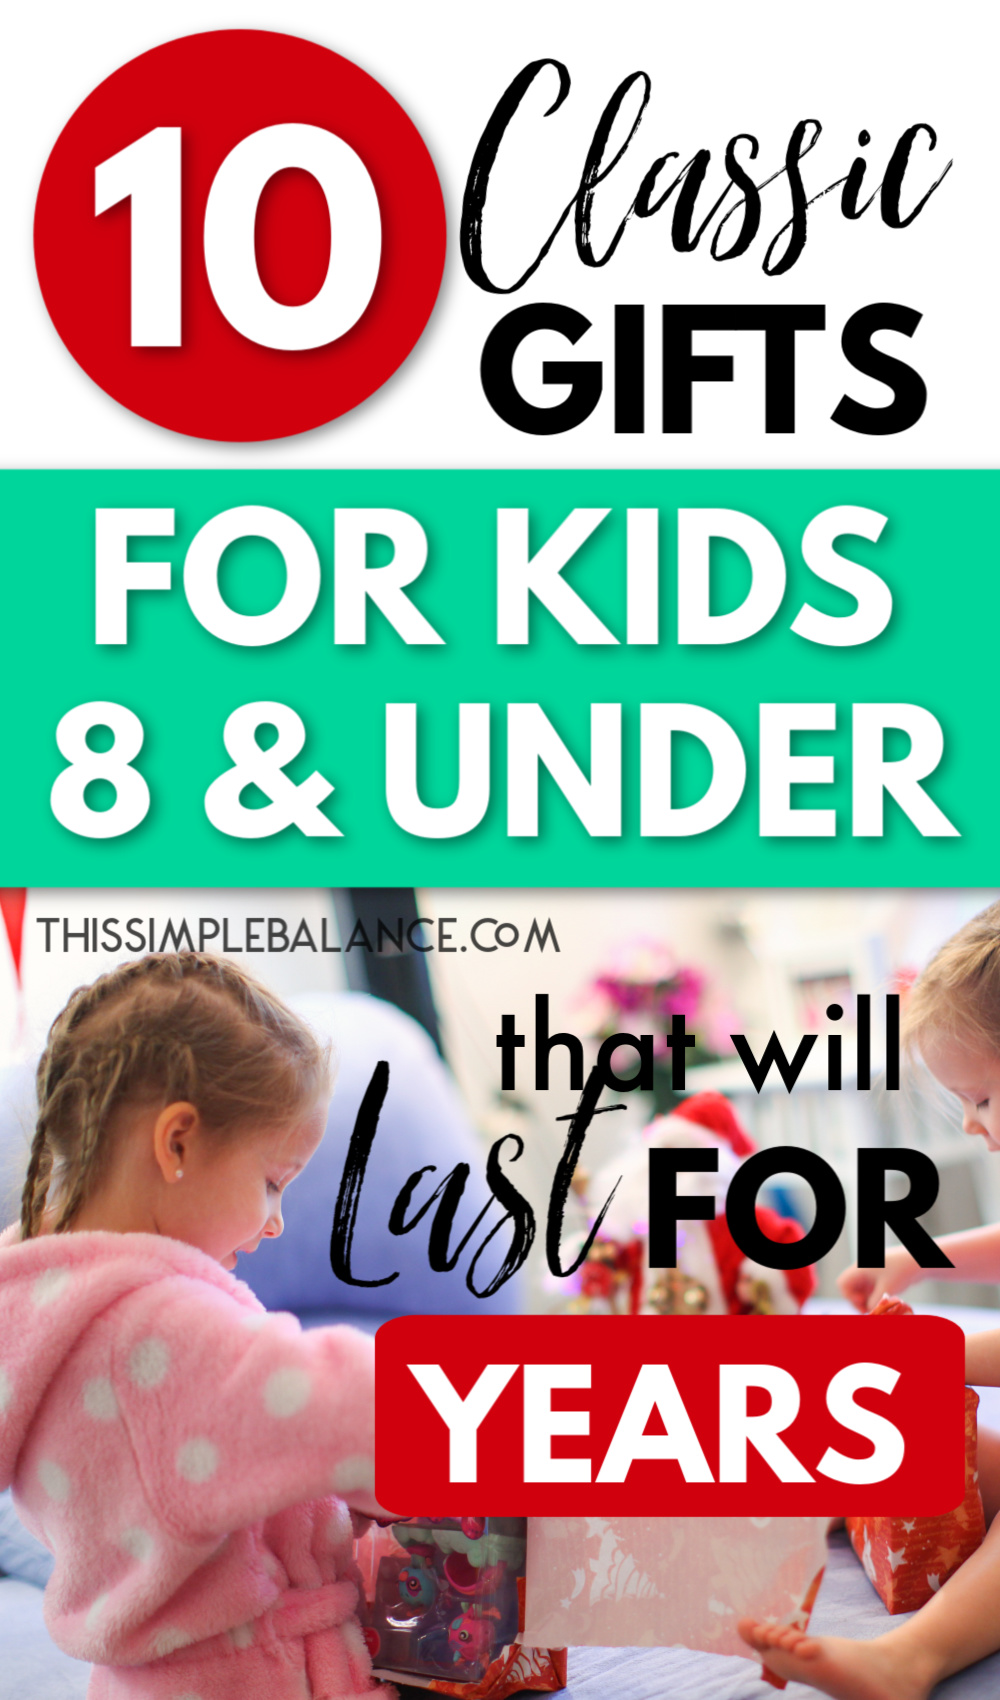 little girls in bathrobes opening presents on Christmas morning, with text overlay, "10 classic gifts for kids 8 & under"